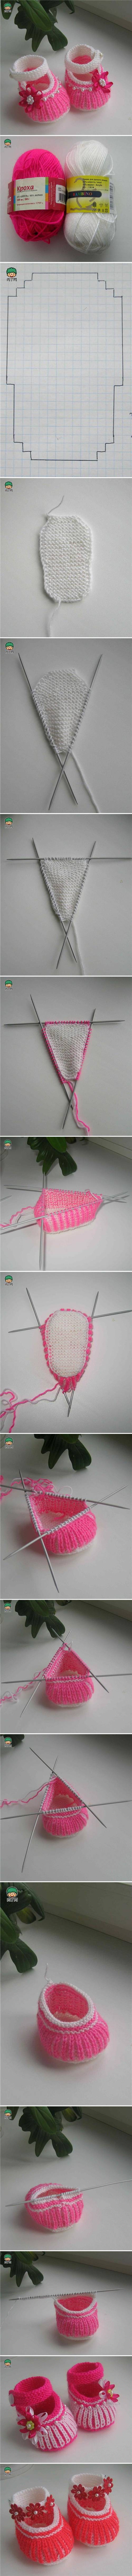 DIY-Cute-Knit-Baby-Shoes